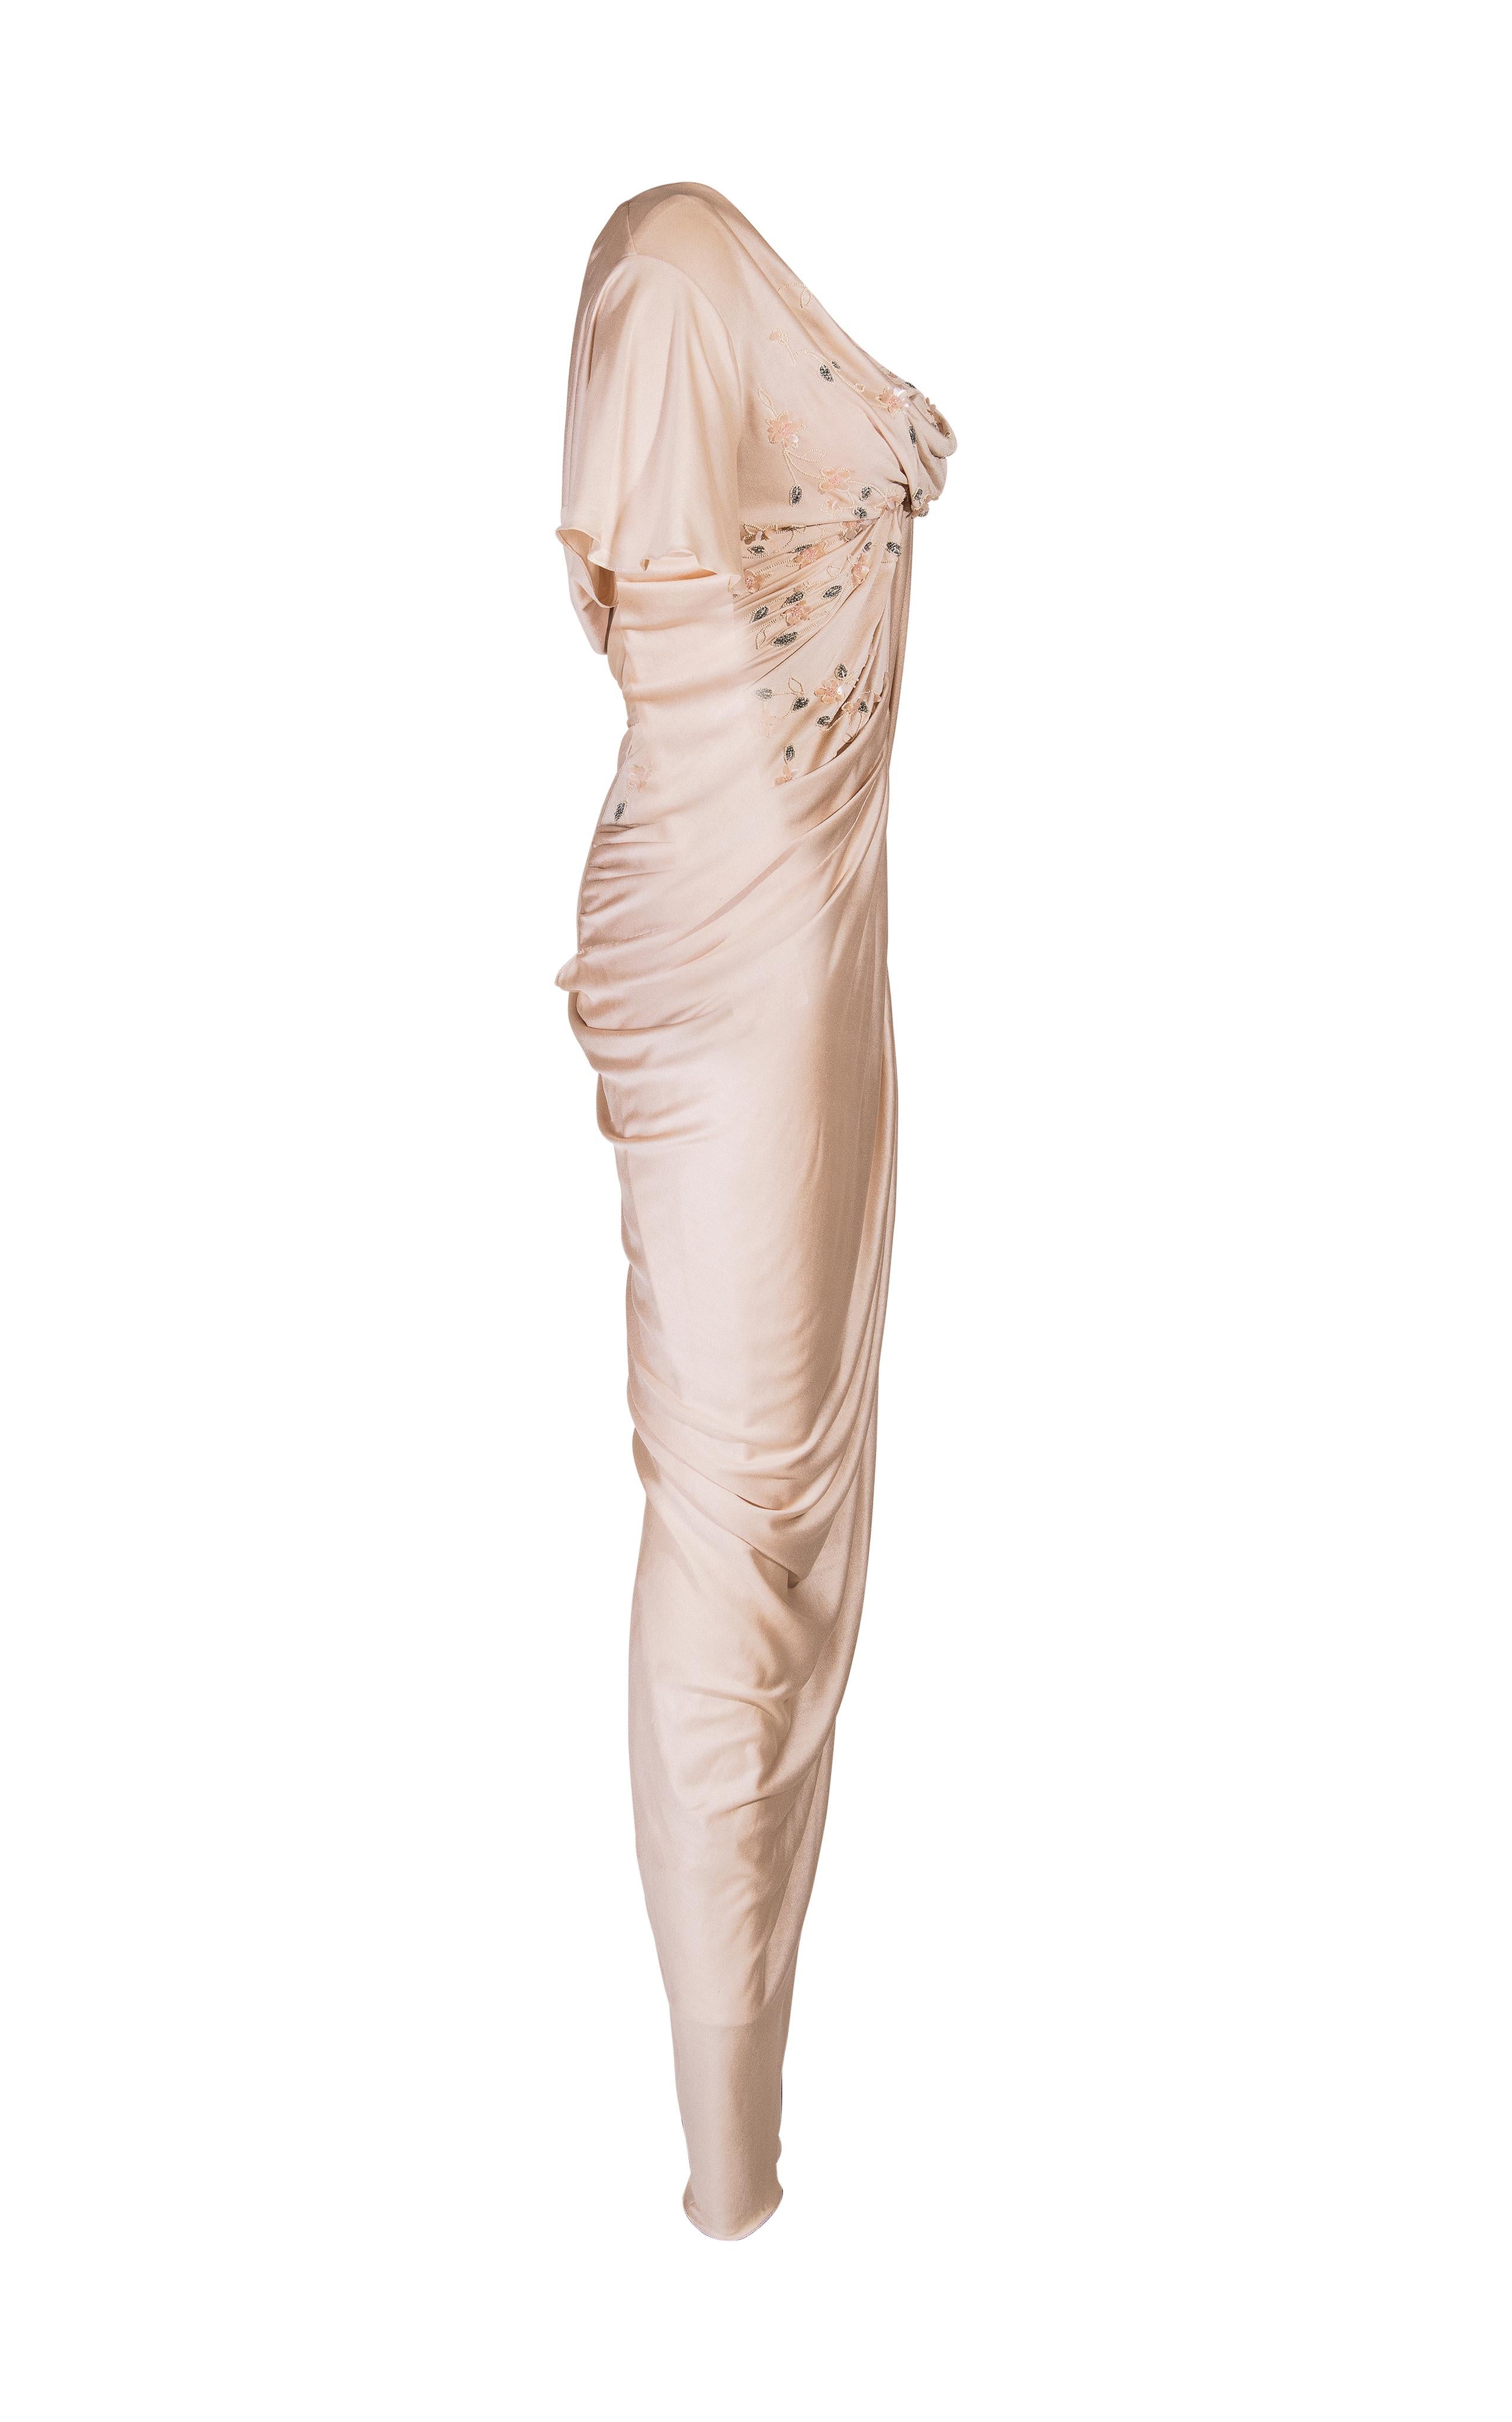 S/S 2007 Christian Dior by John Galliano Cream Silk Floral Embellished Gown In Excellent Condition In North Hollywood, CA